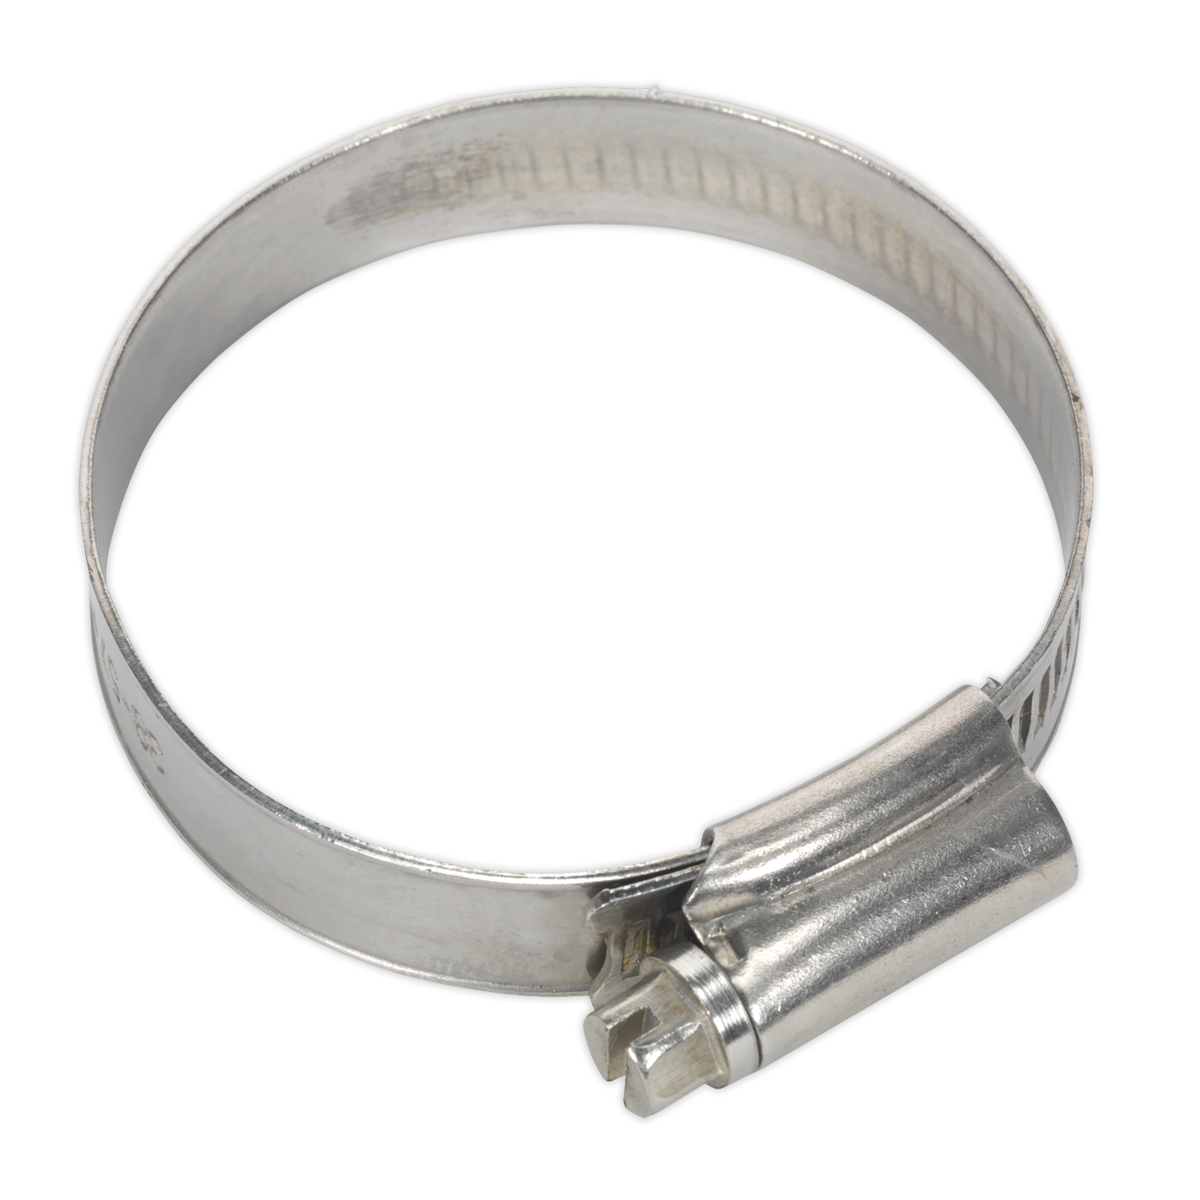 Sealey Hose Clip Stainless Steel Ø38-57mm Pack of 10